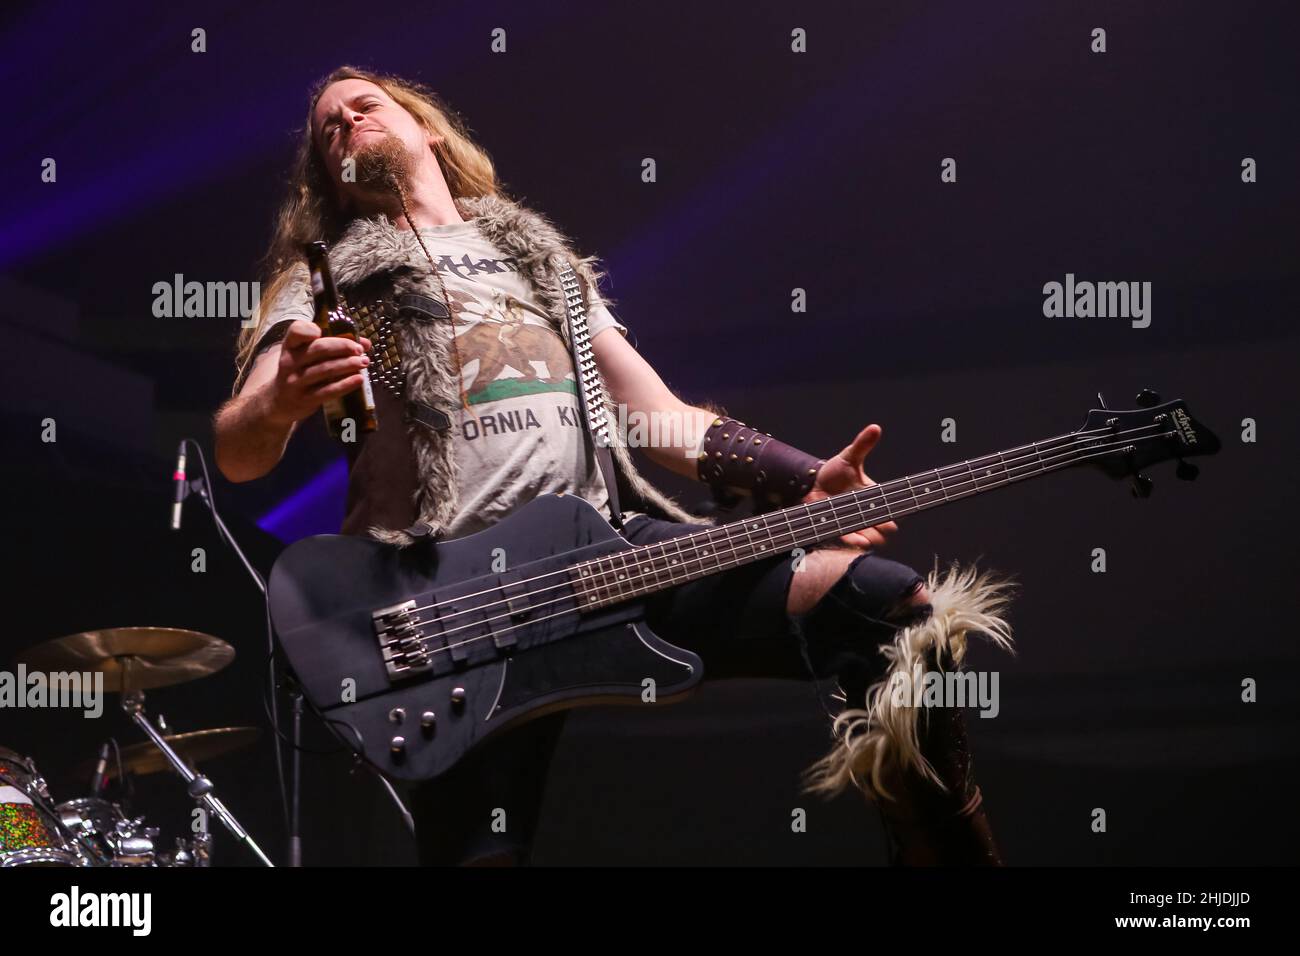 Gloryhammer, British symphonic power metal band, self-described as heroic fantasy power metal: James Cartwright aka The Hootsman (bass). Concert at Wartenberg Oval in Wartenberg-Angersbach near Fulda, Germany, 18th Jan, 2017, as support for band Hammerfall, Built To Tour 2017. Stock Photo